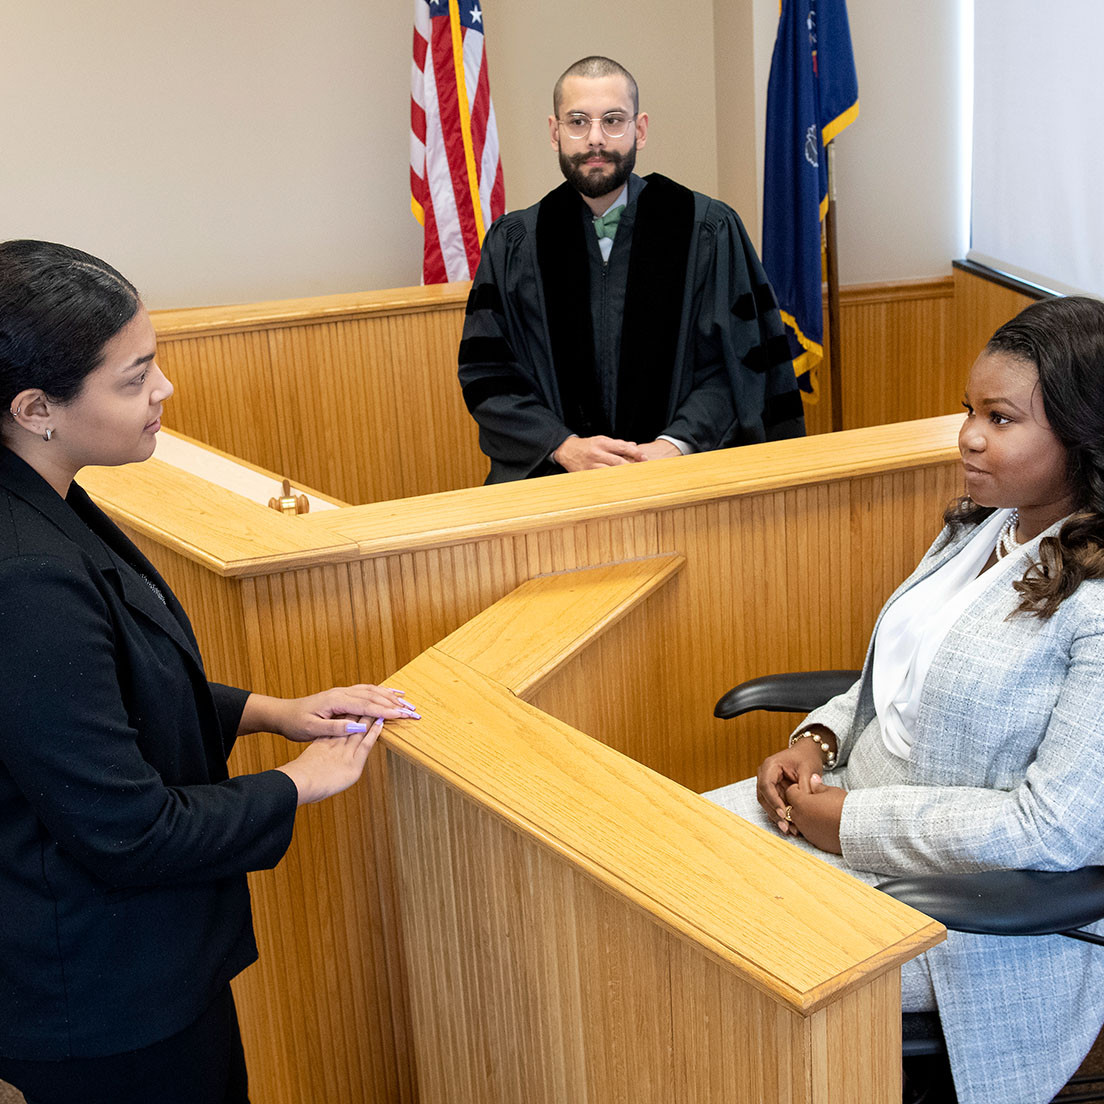 students in the mock courtroom